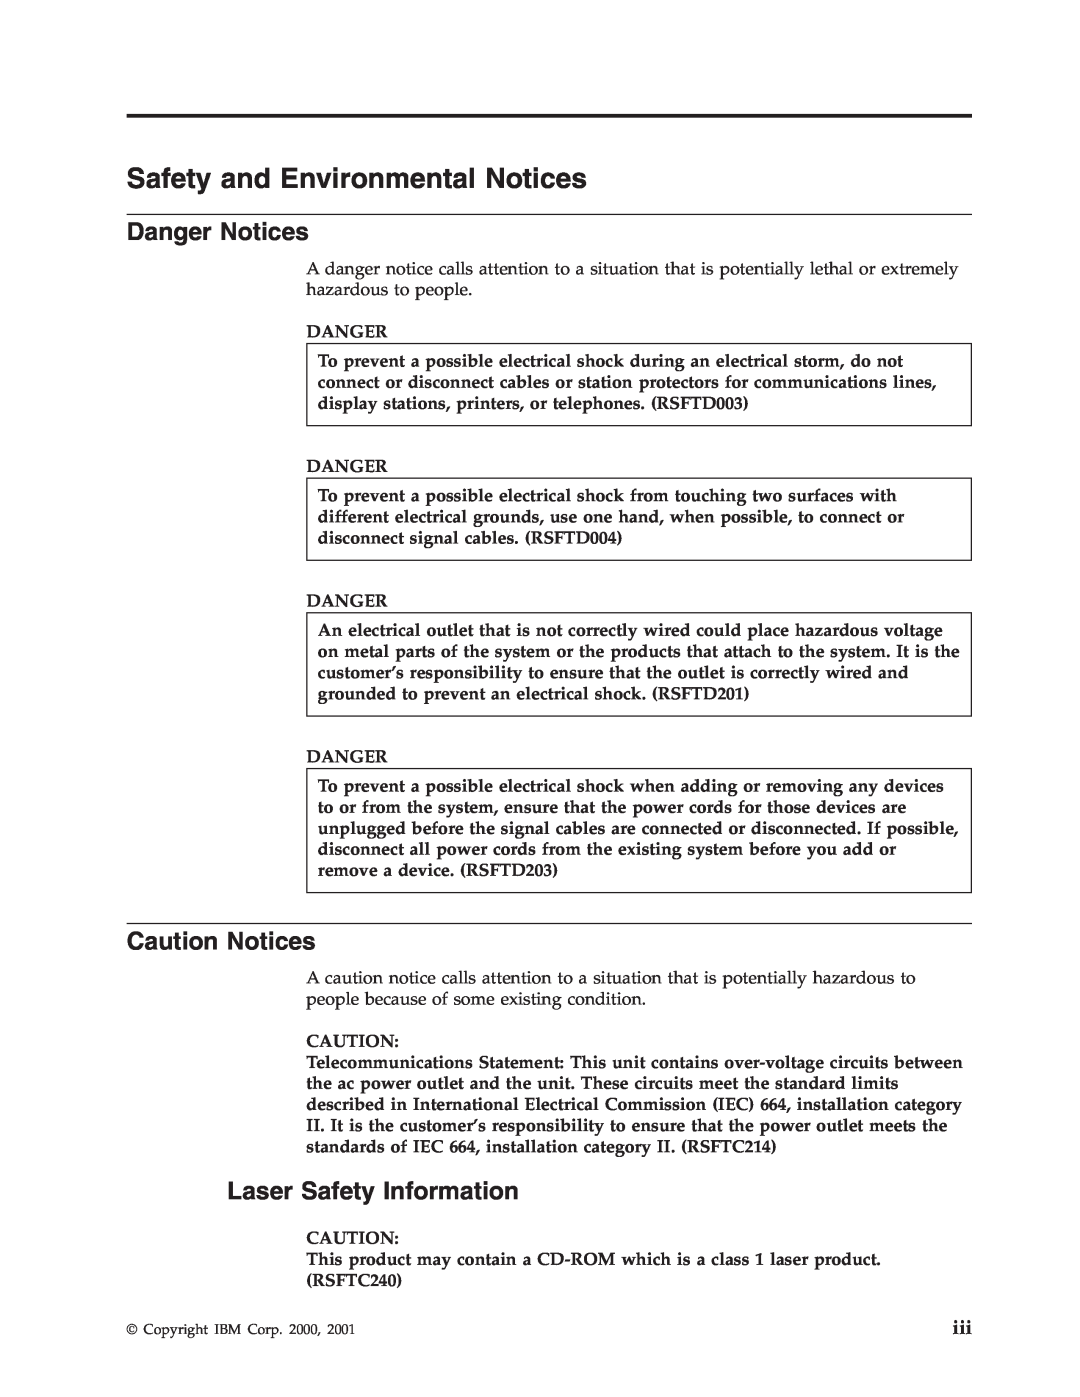 IBM SENG-3002-01 manual Safety and Environmental Notices, Danger Notices, Caution Notices, Laser Safety Information 